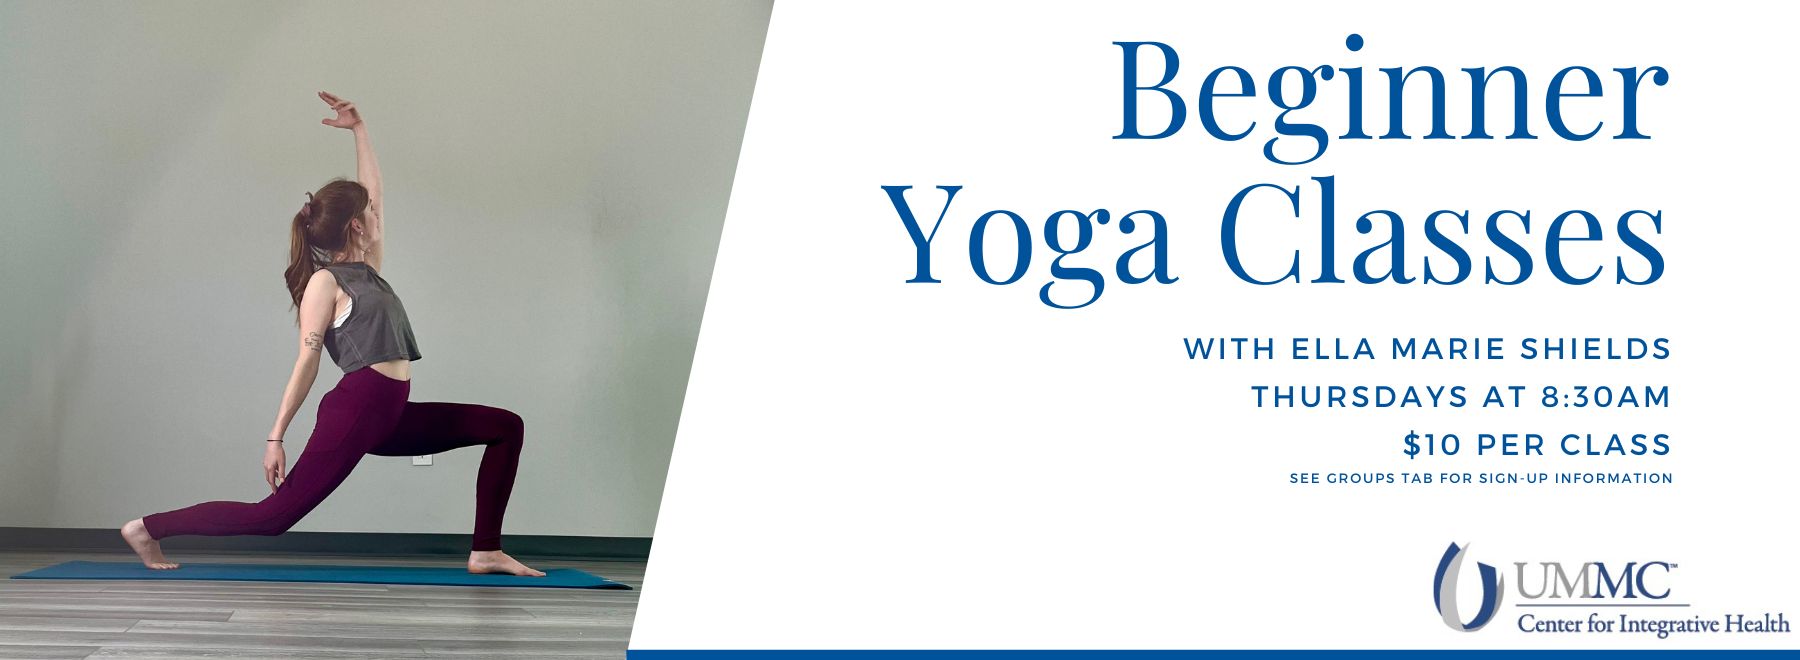 woman performing yoga pose - Beginner Yoga Classes, Every Tuesday at 8:30am